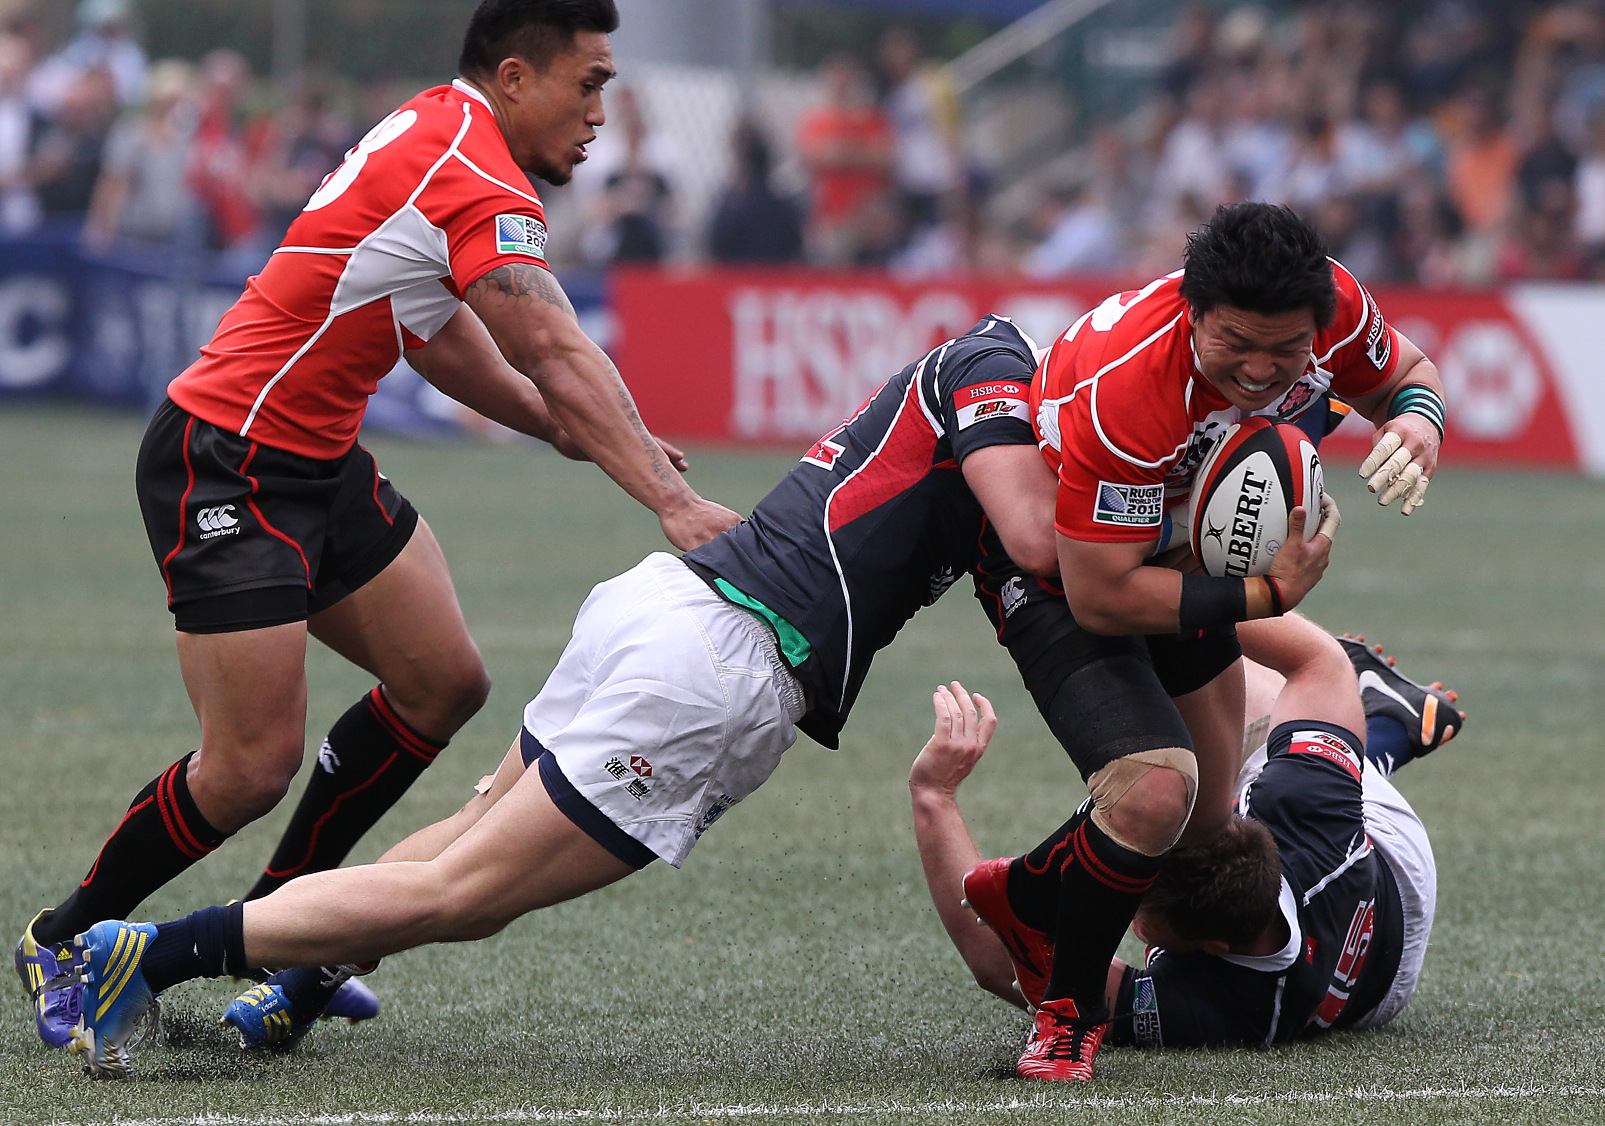 Hong Kong's new rugby nous will be put to the test against Japan in the 2014 Asian Five Nations. Photo: Jonathan Wong